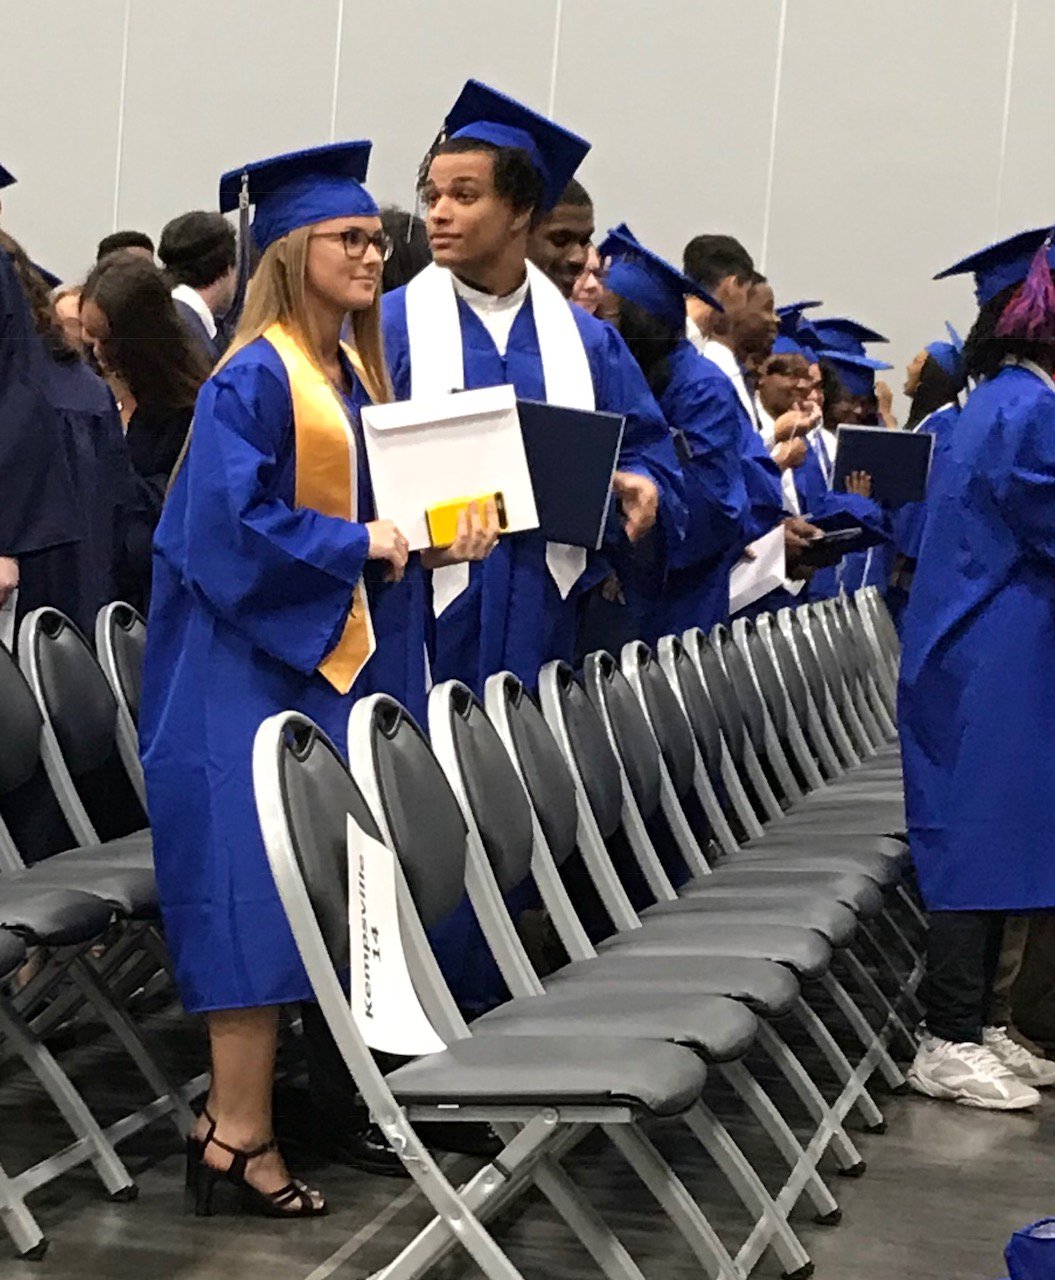 Landstown HS on Twitter "Congratulations to the 22 summer graduates